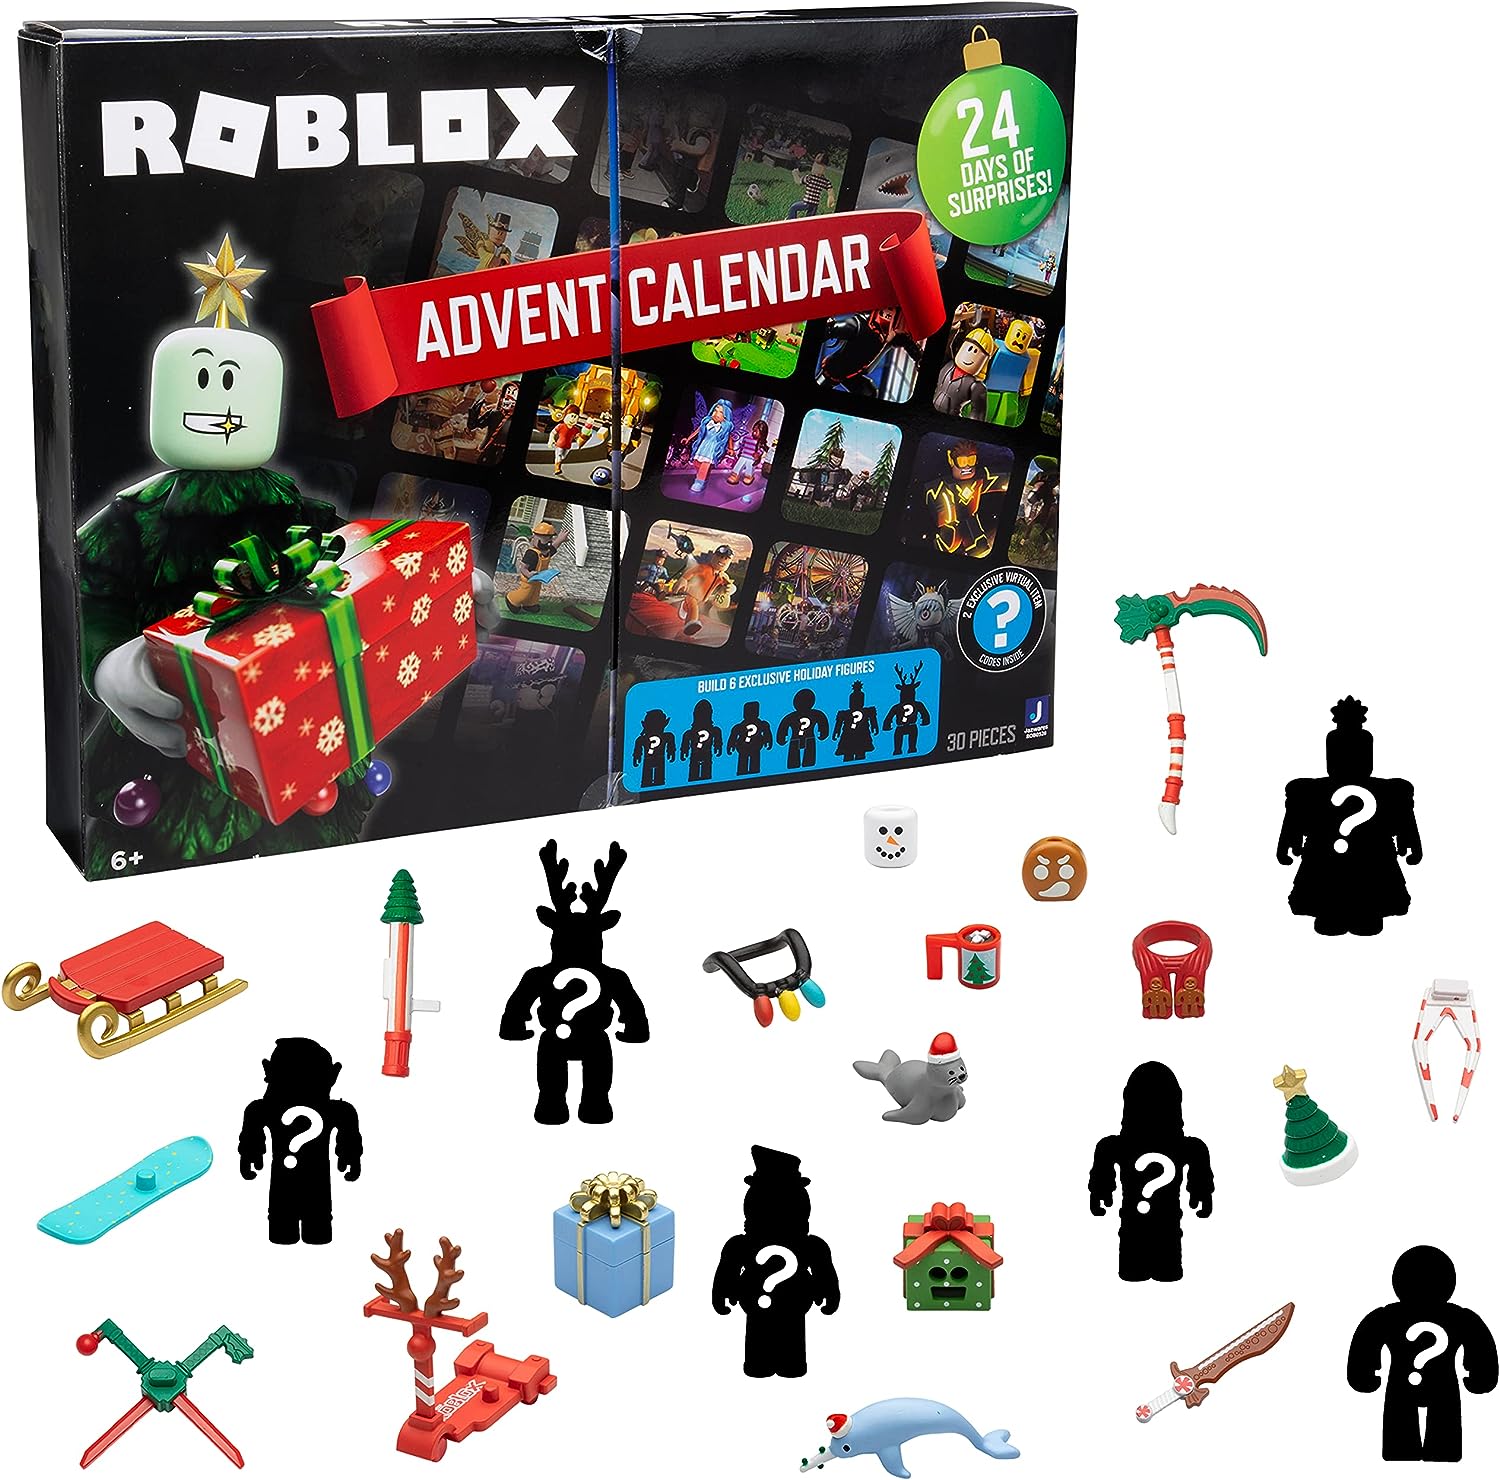 Roblox ROB0528 Advent Calendar with Exclusive Figures, Accessories and Game Codes from 6 Years